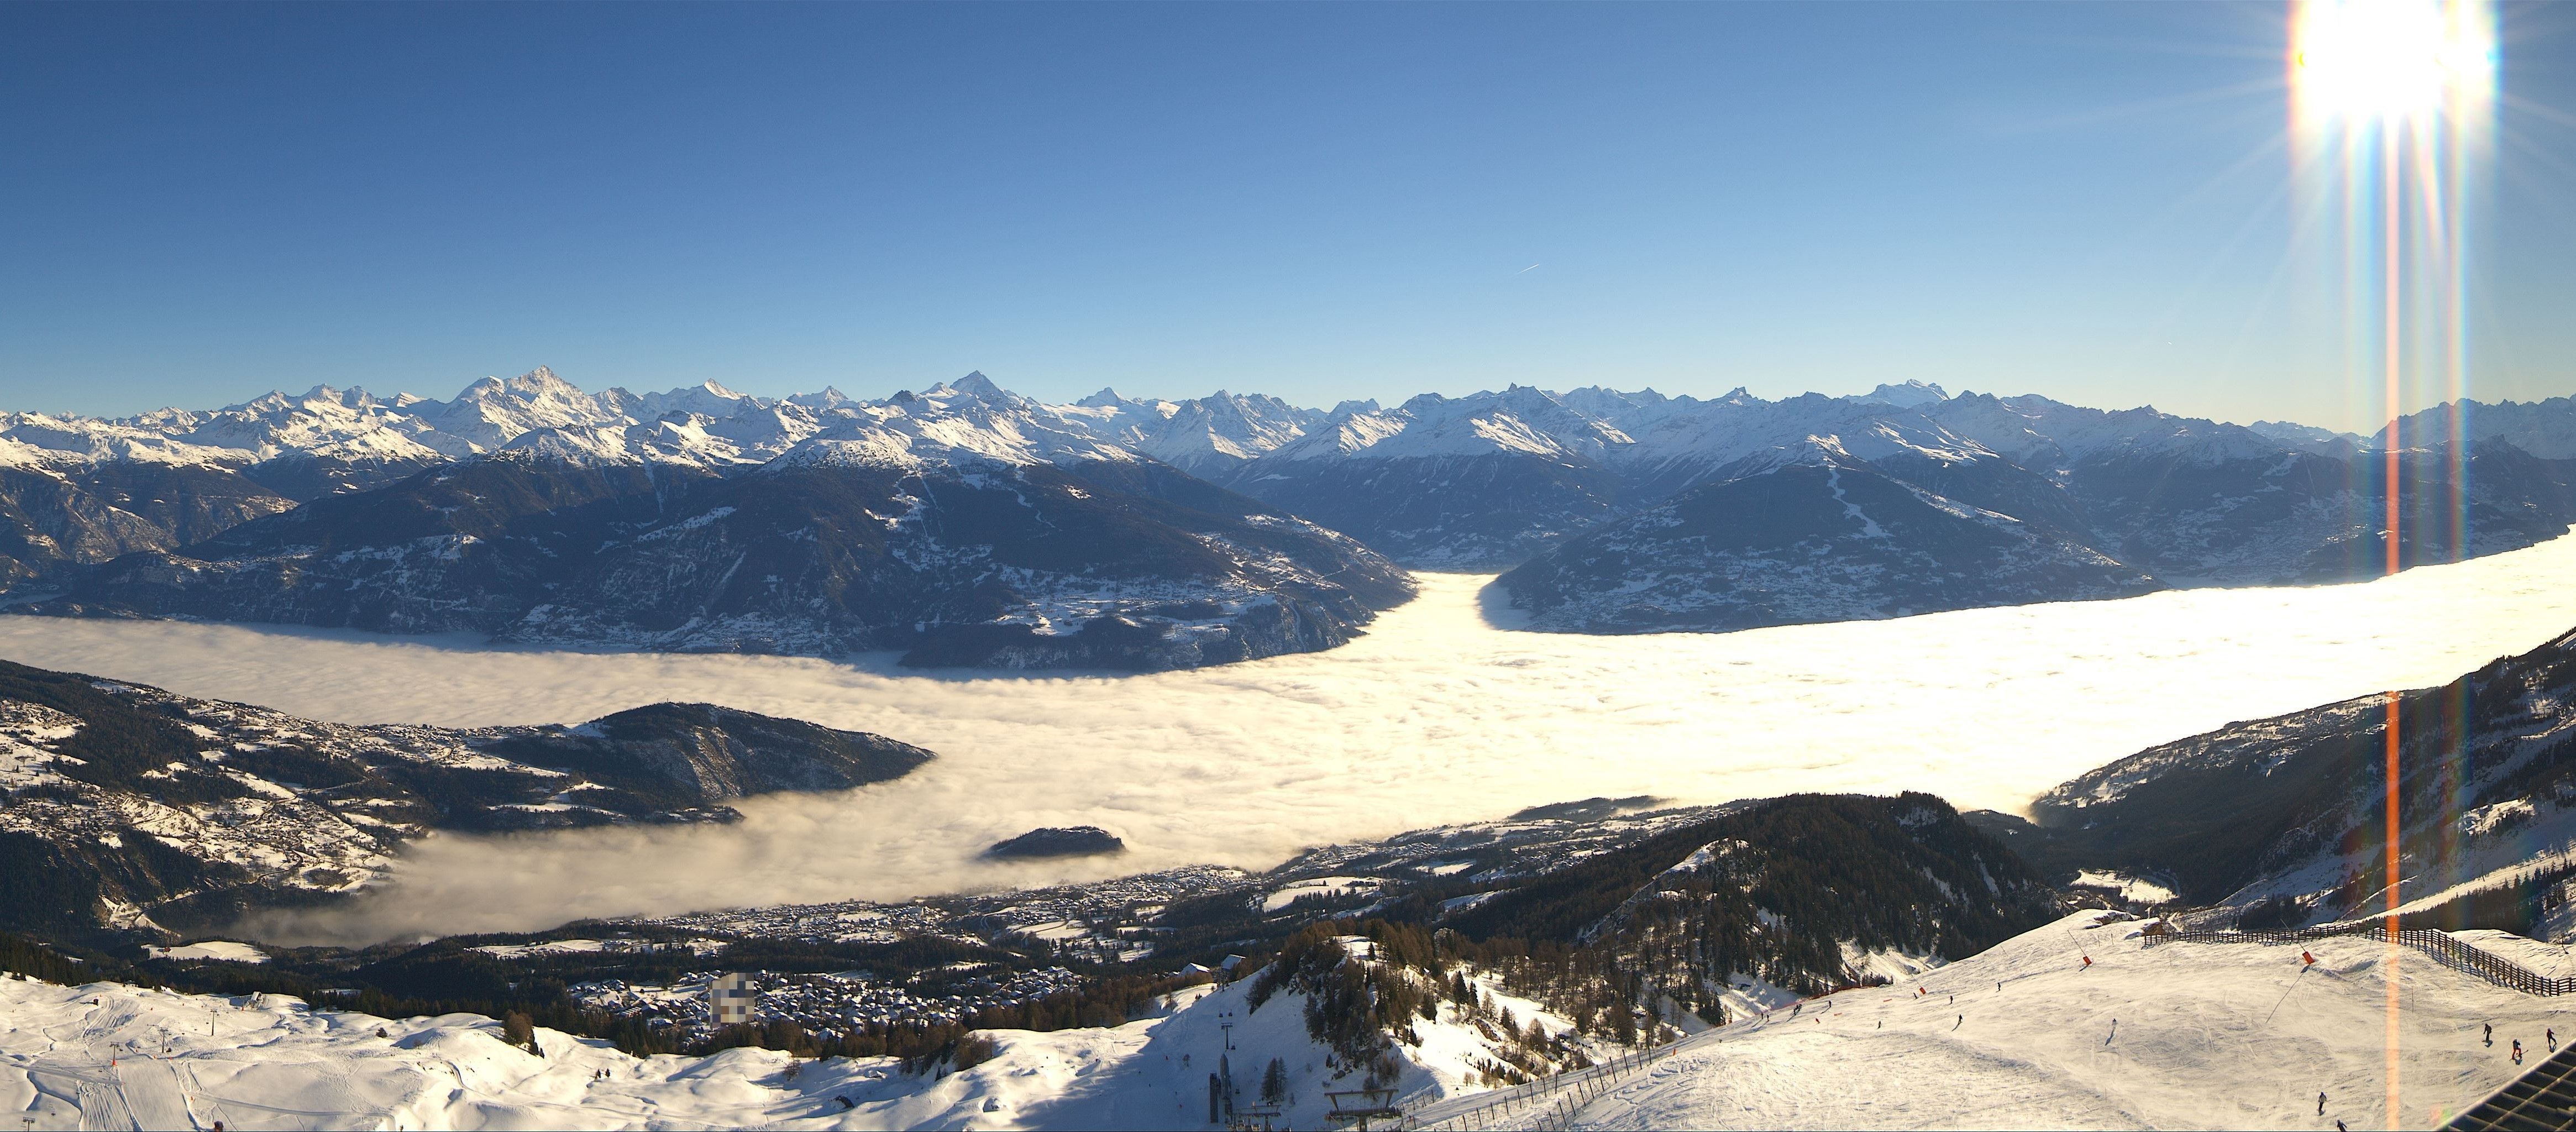 Inversion weather in Anzère (roundshot.com)